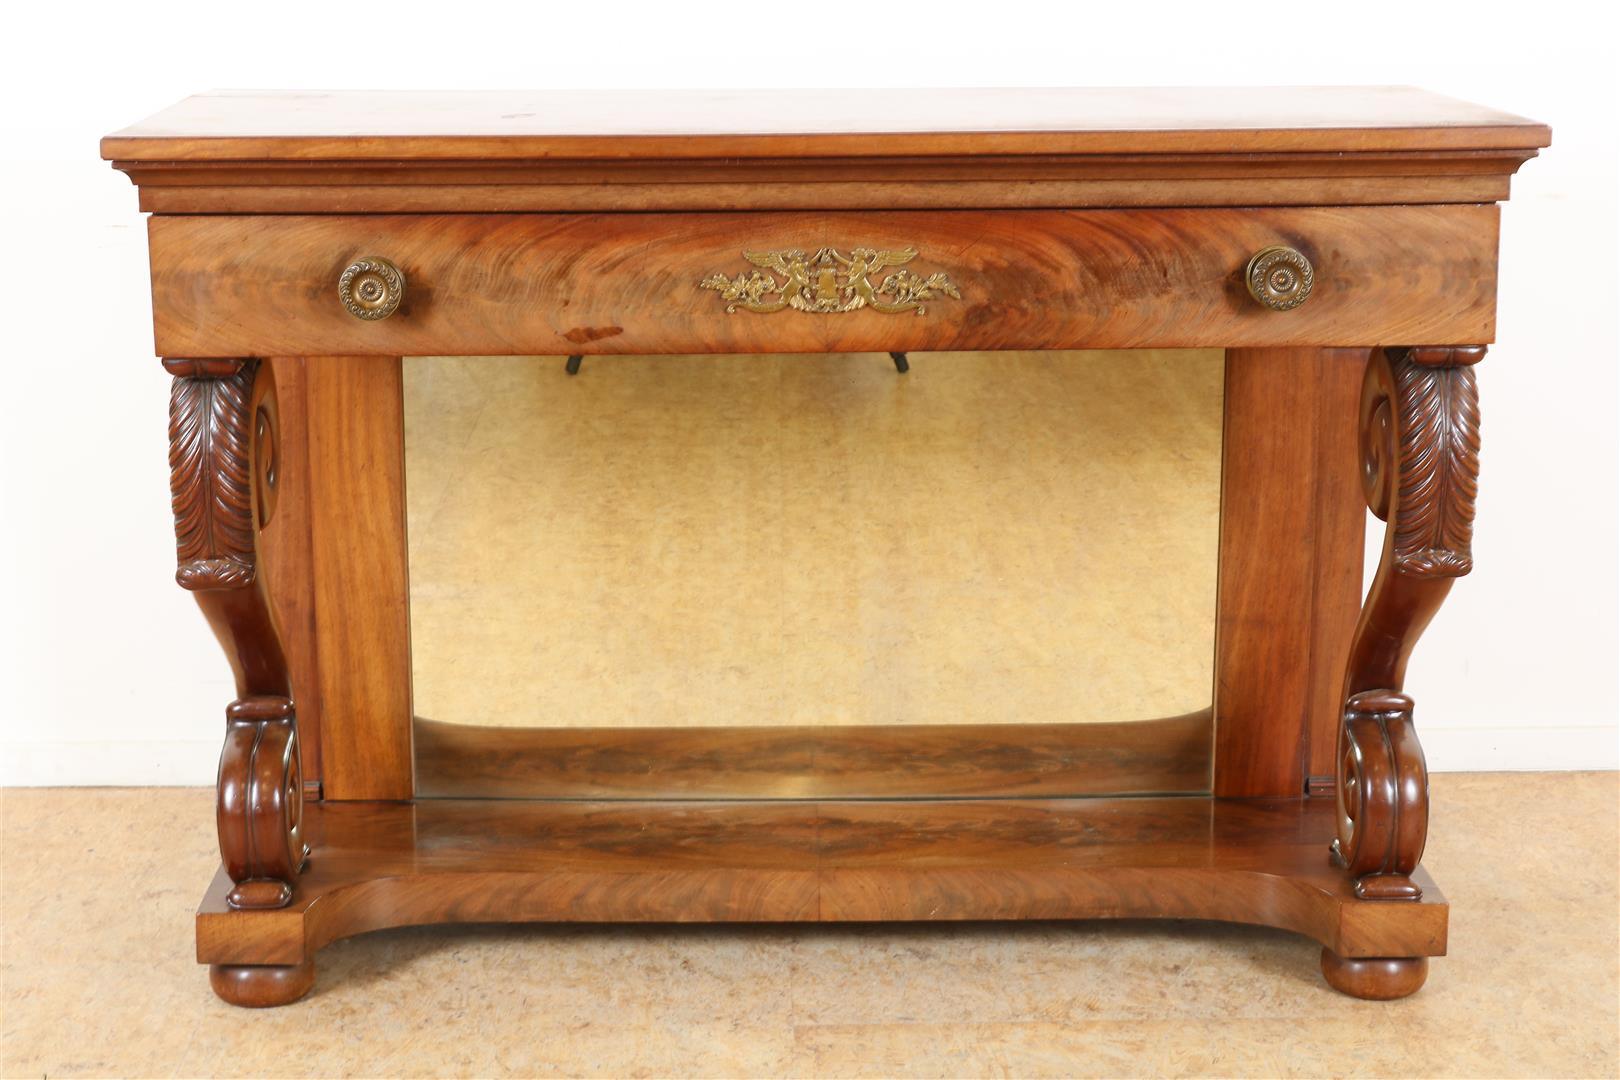 Mahogany Empire trumeau with plinth drawer on volutes with carved acanthus leaves, 2 side leaves and